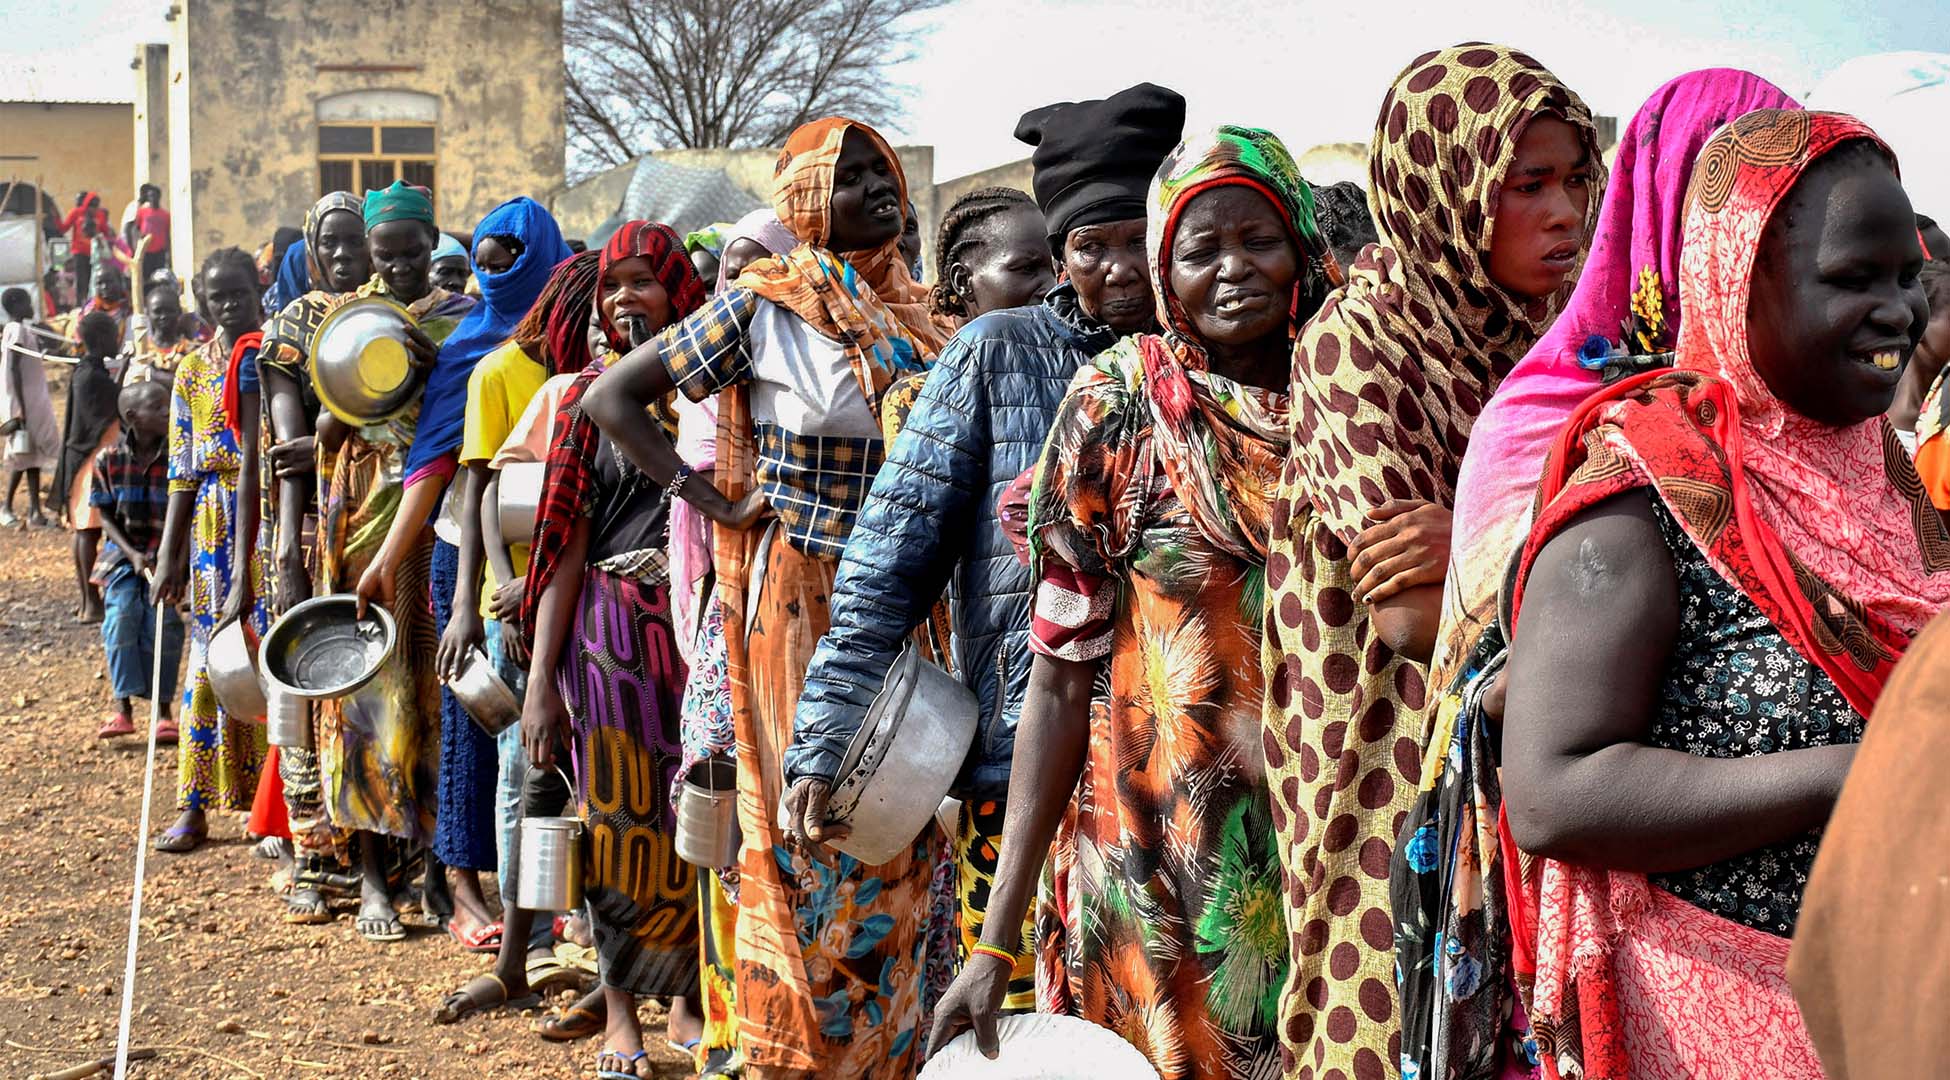 Pictured are many women standing in line. Some of them hold metal pots and plates. They wear ankle-length robes of different colors. The day seems sunny. 